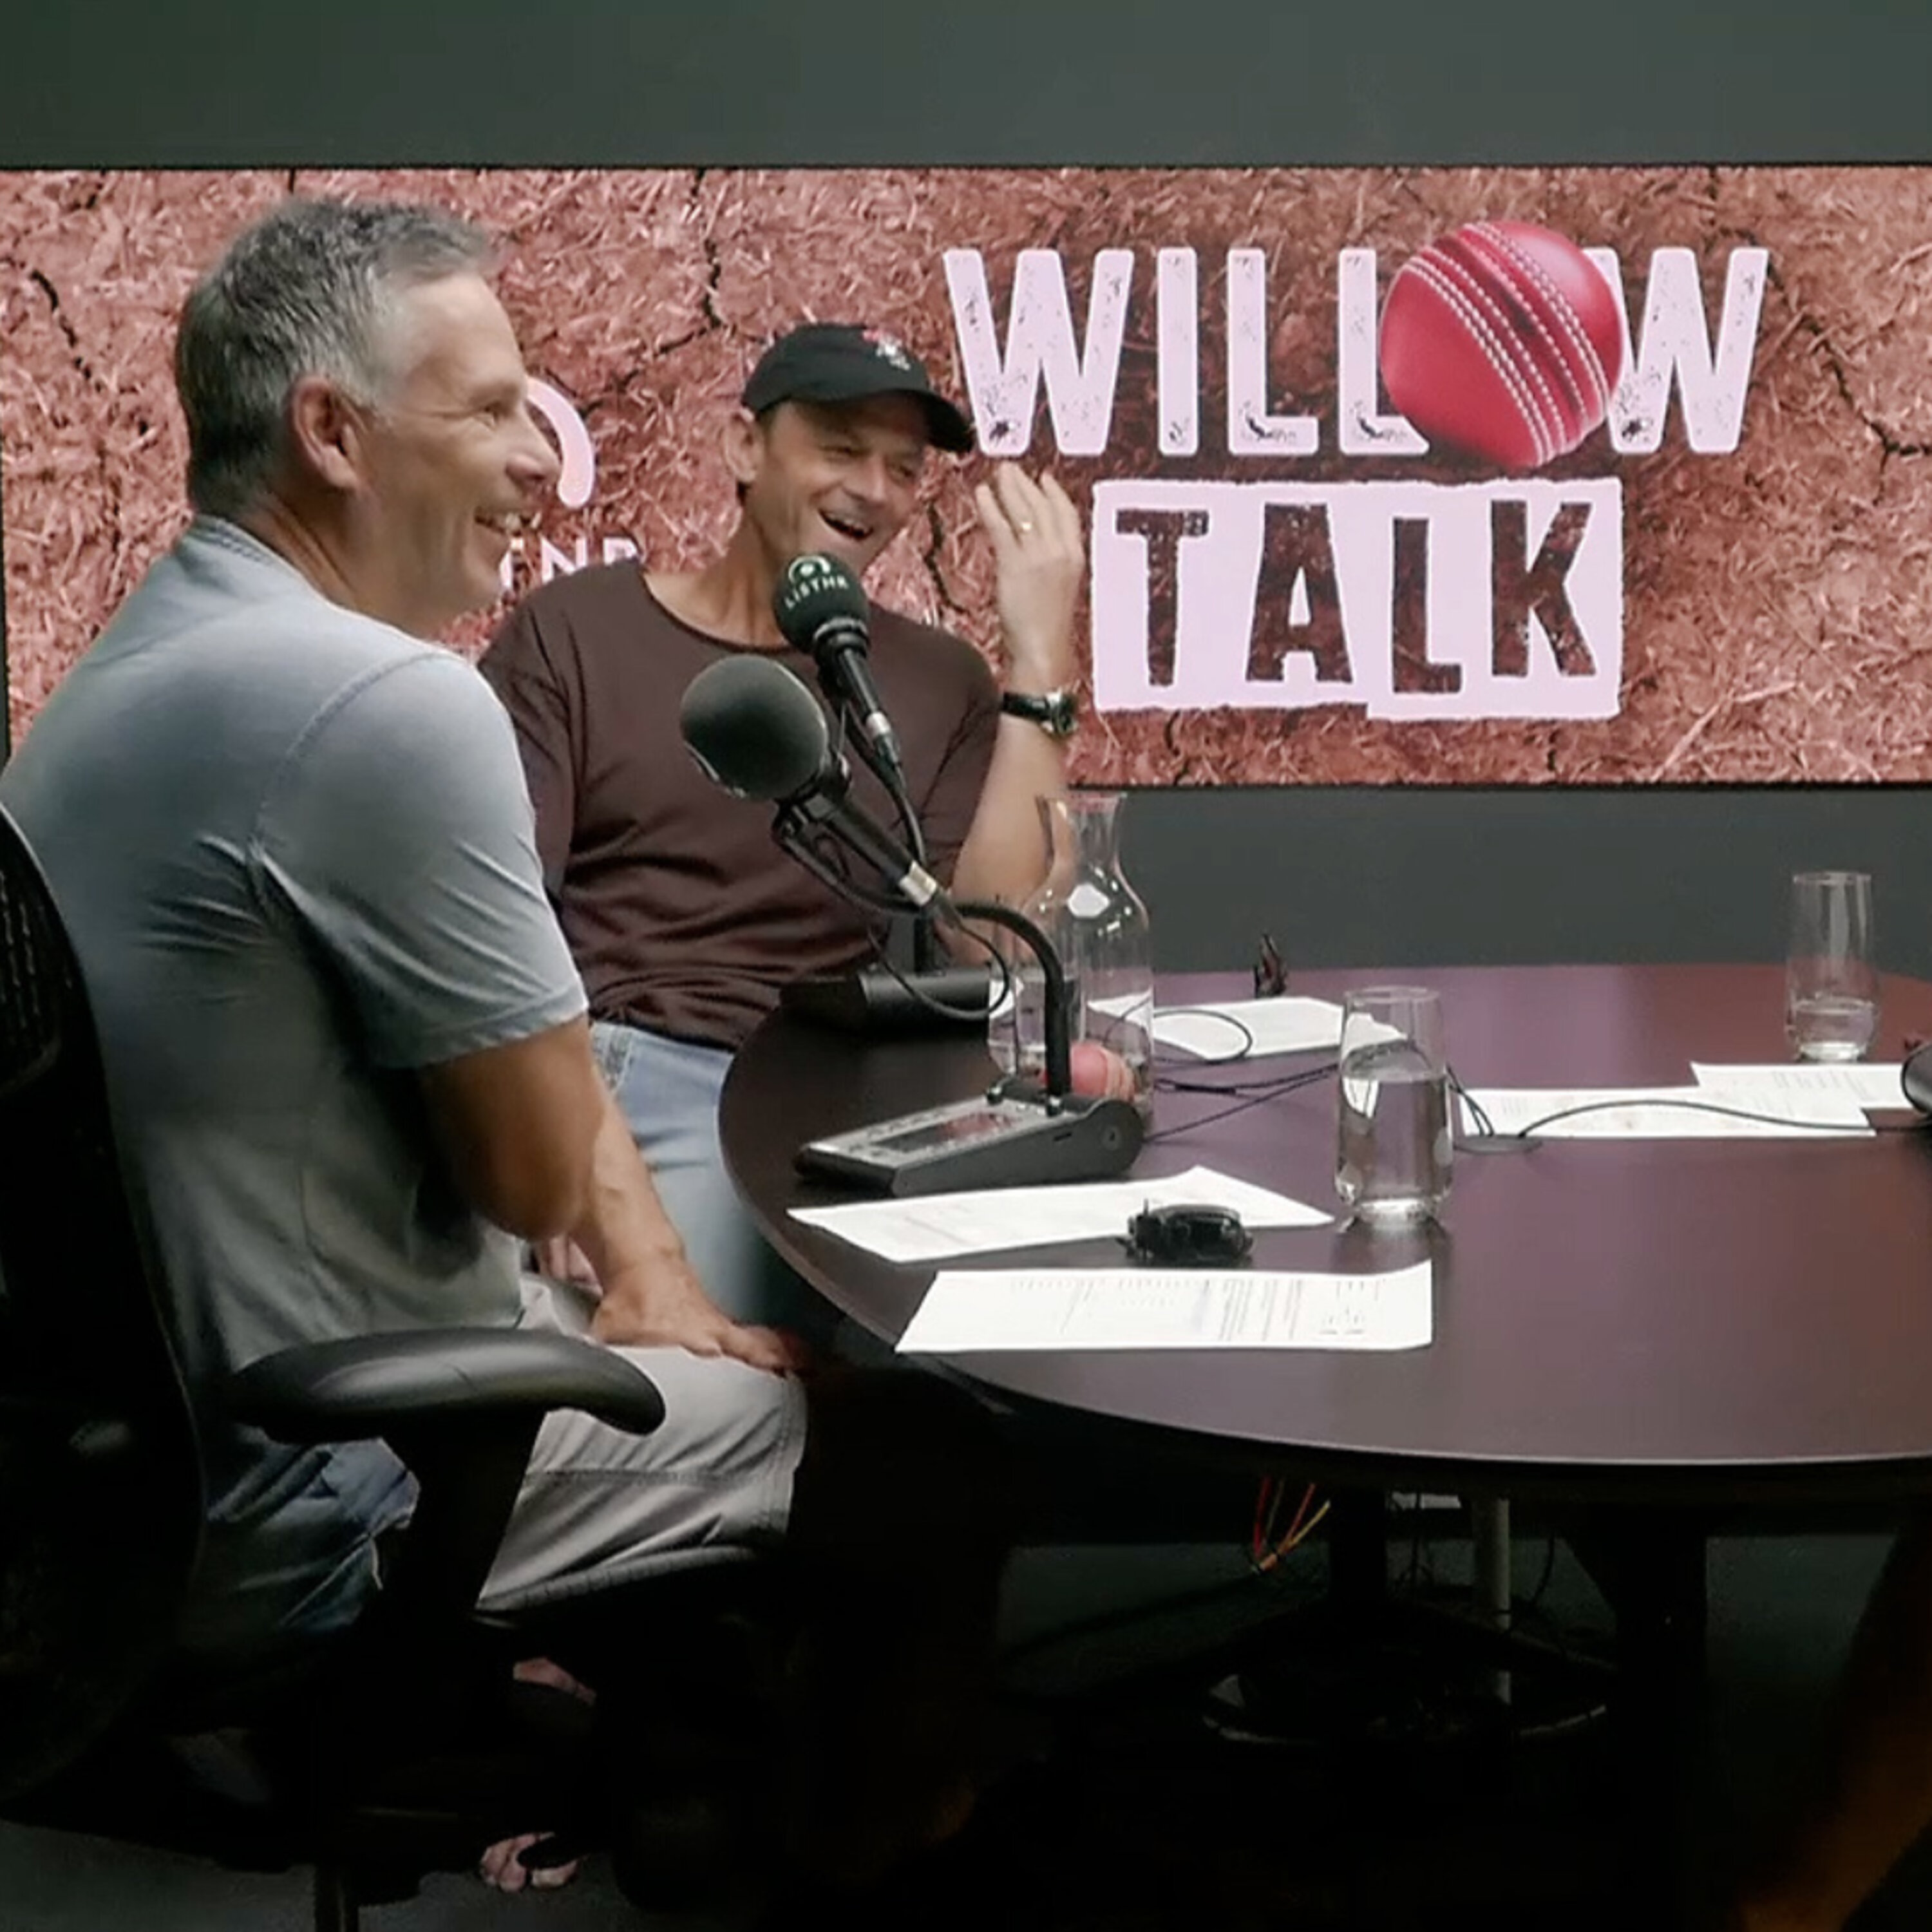 Willow Talk Preview | "Oh ****" Adam Gilchrist's Incredible Story About Captaining Australia In India